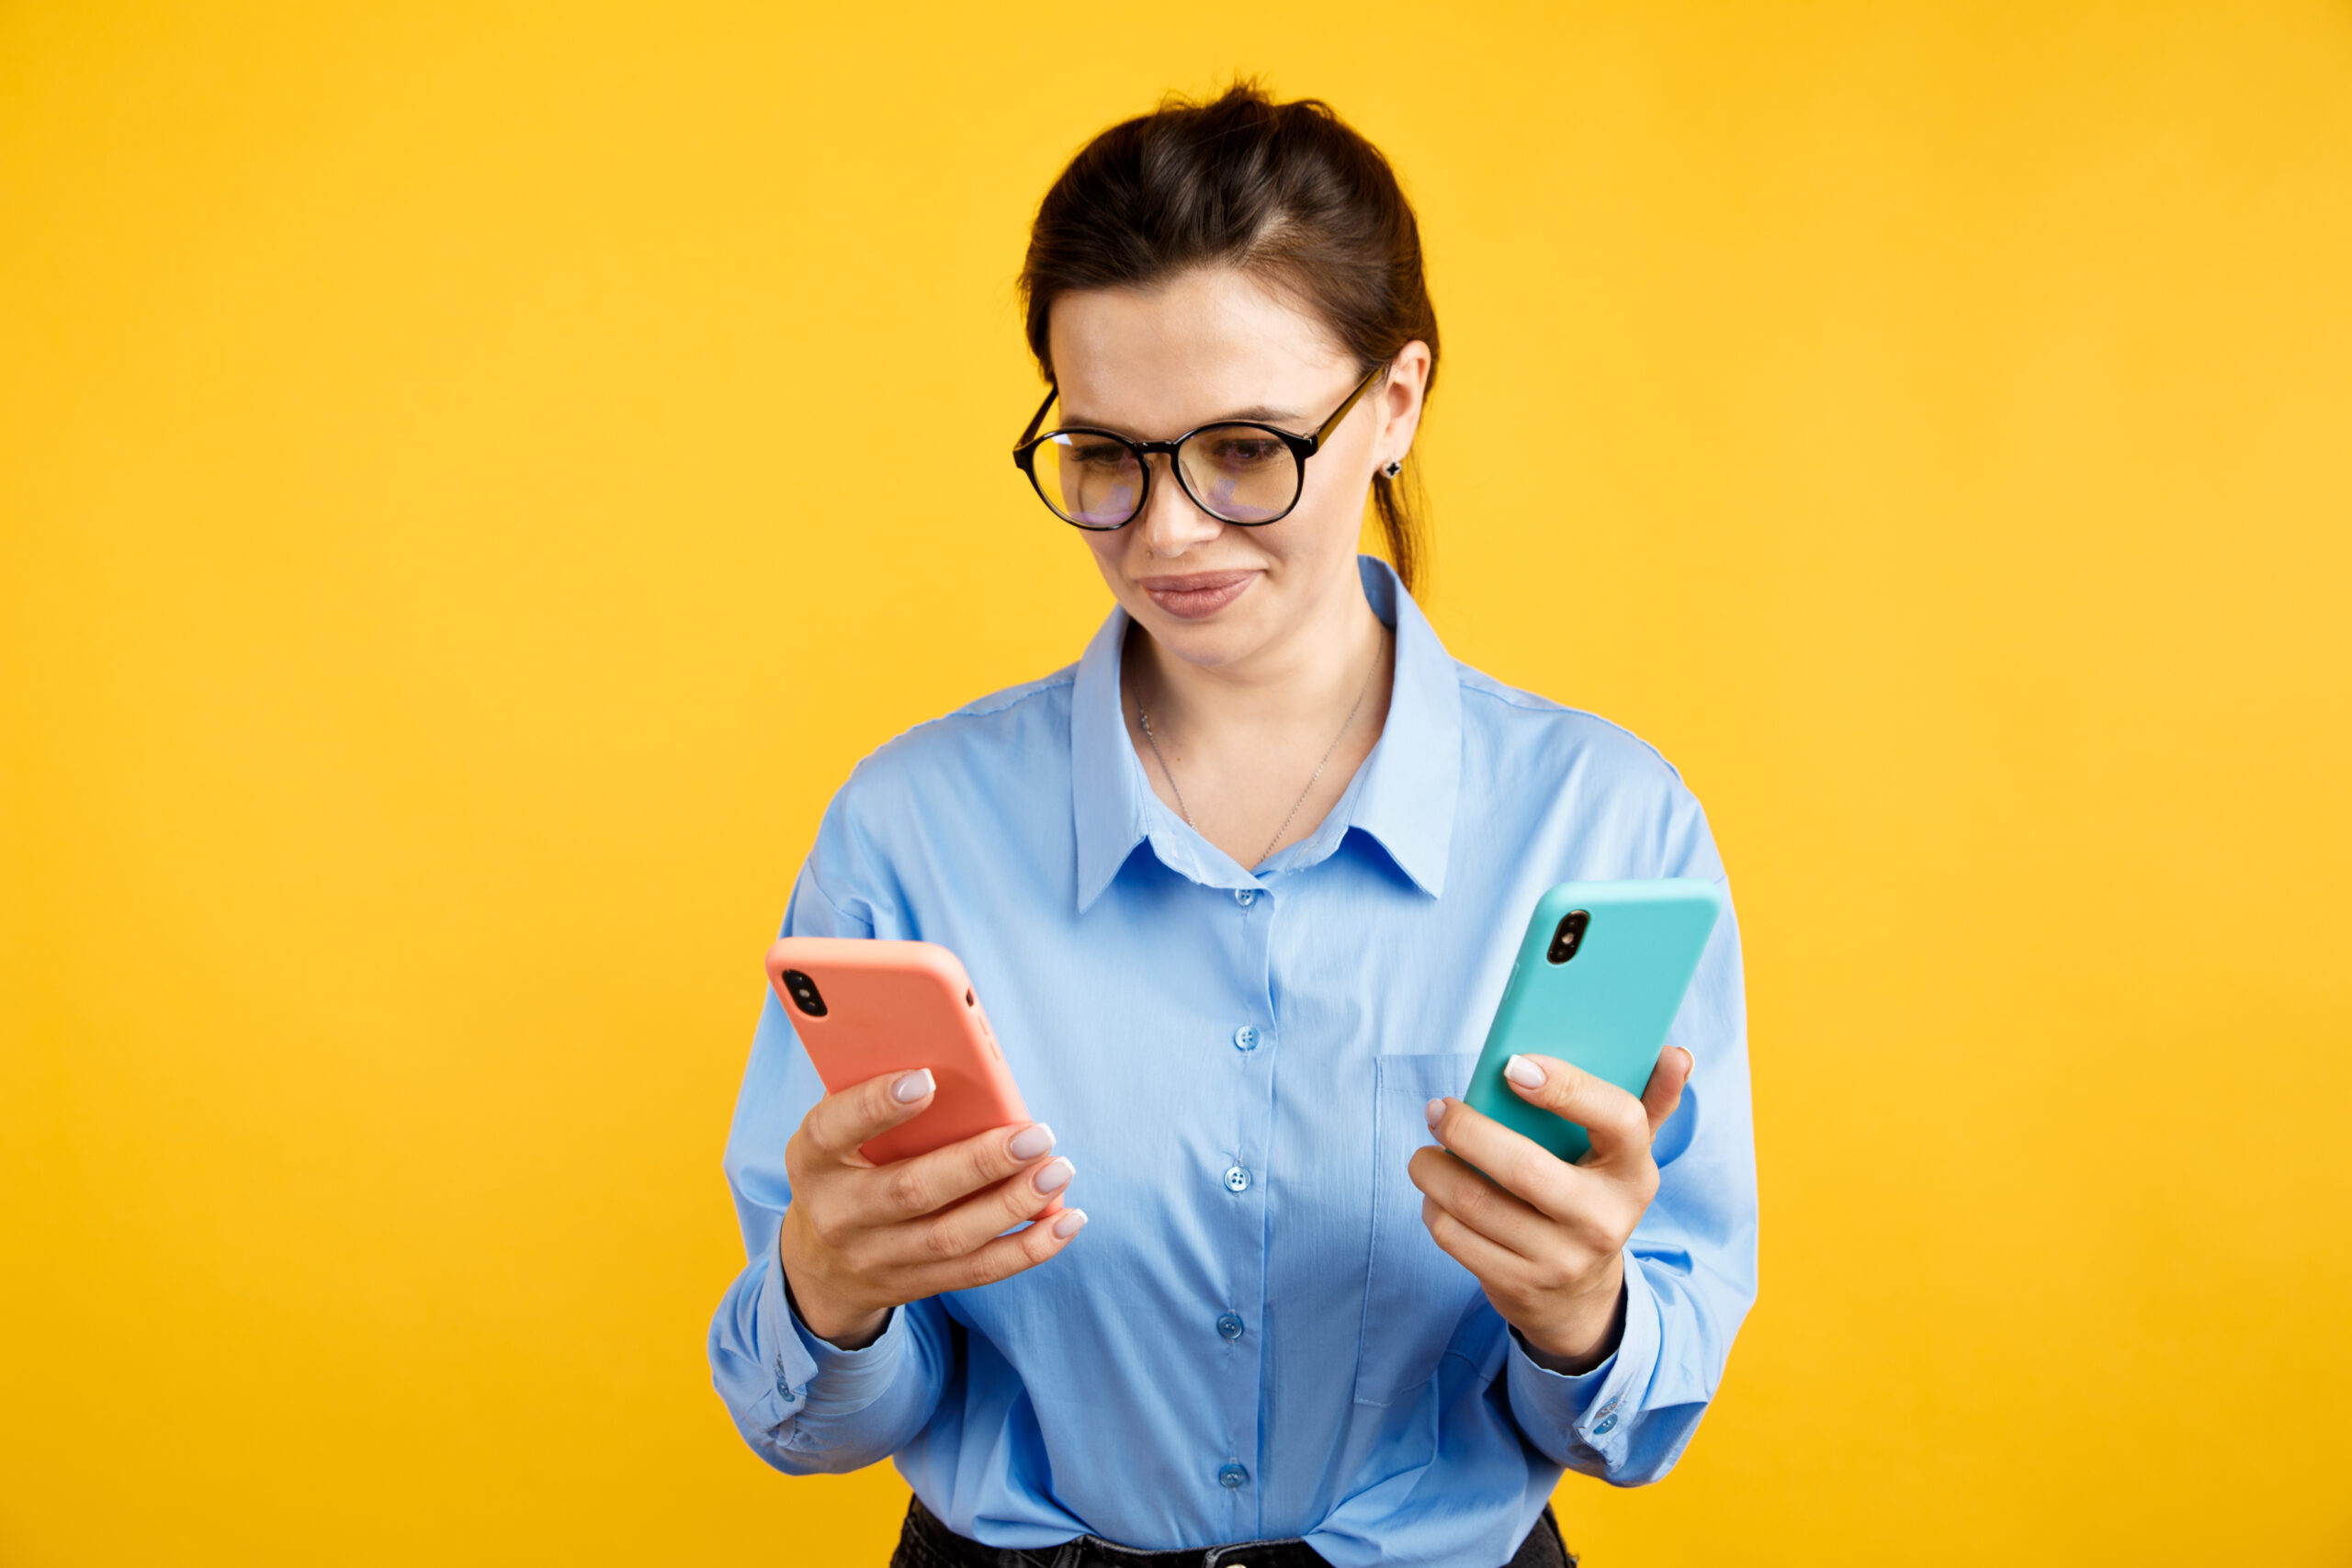 A young professional in front of a yellow background holds one smartphone with a different colored case in each hand.